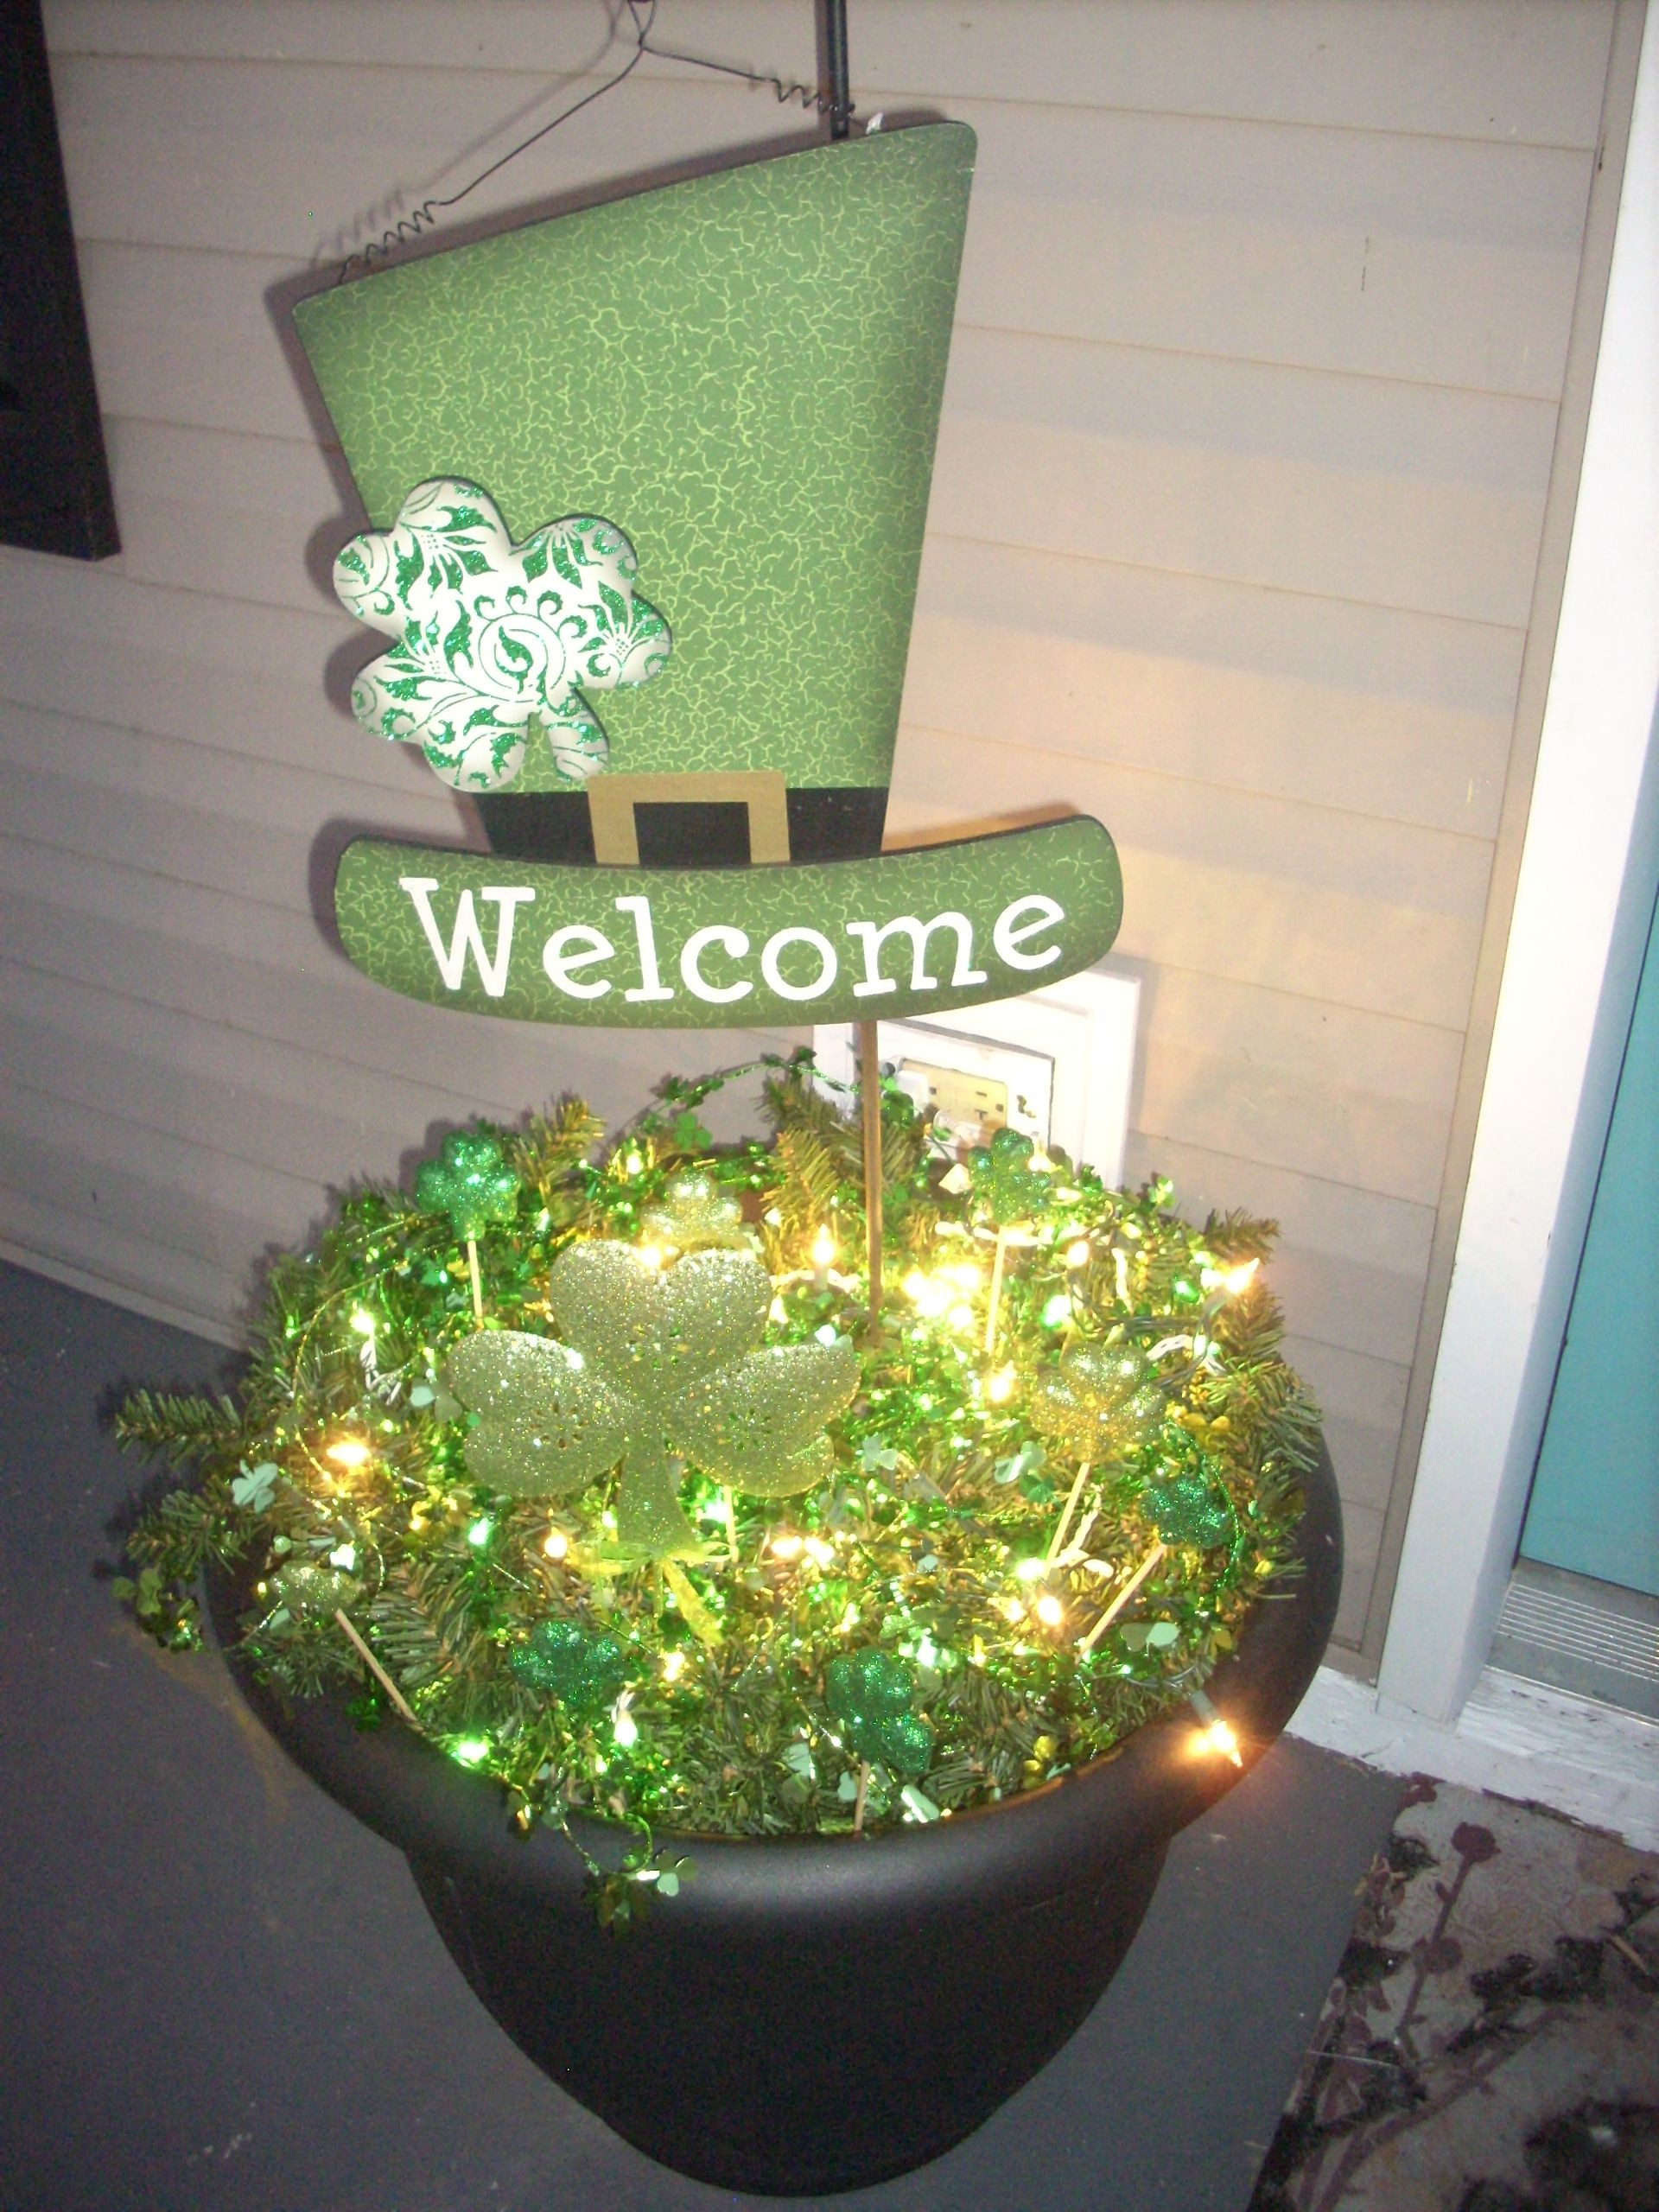 Diy St Patrick's Day Decorations
 St Patricks Day Porch decoration I made Shown at night